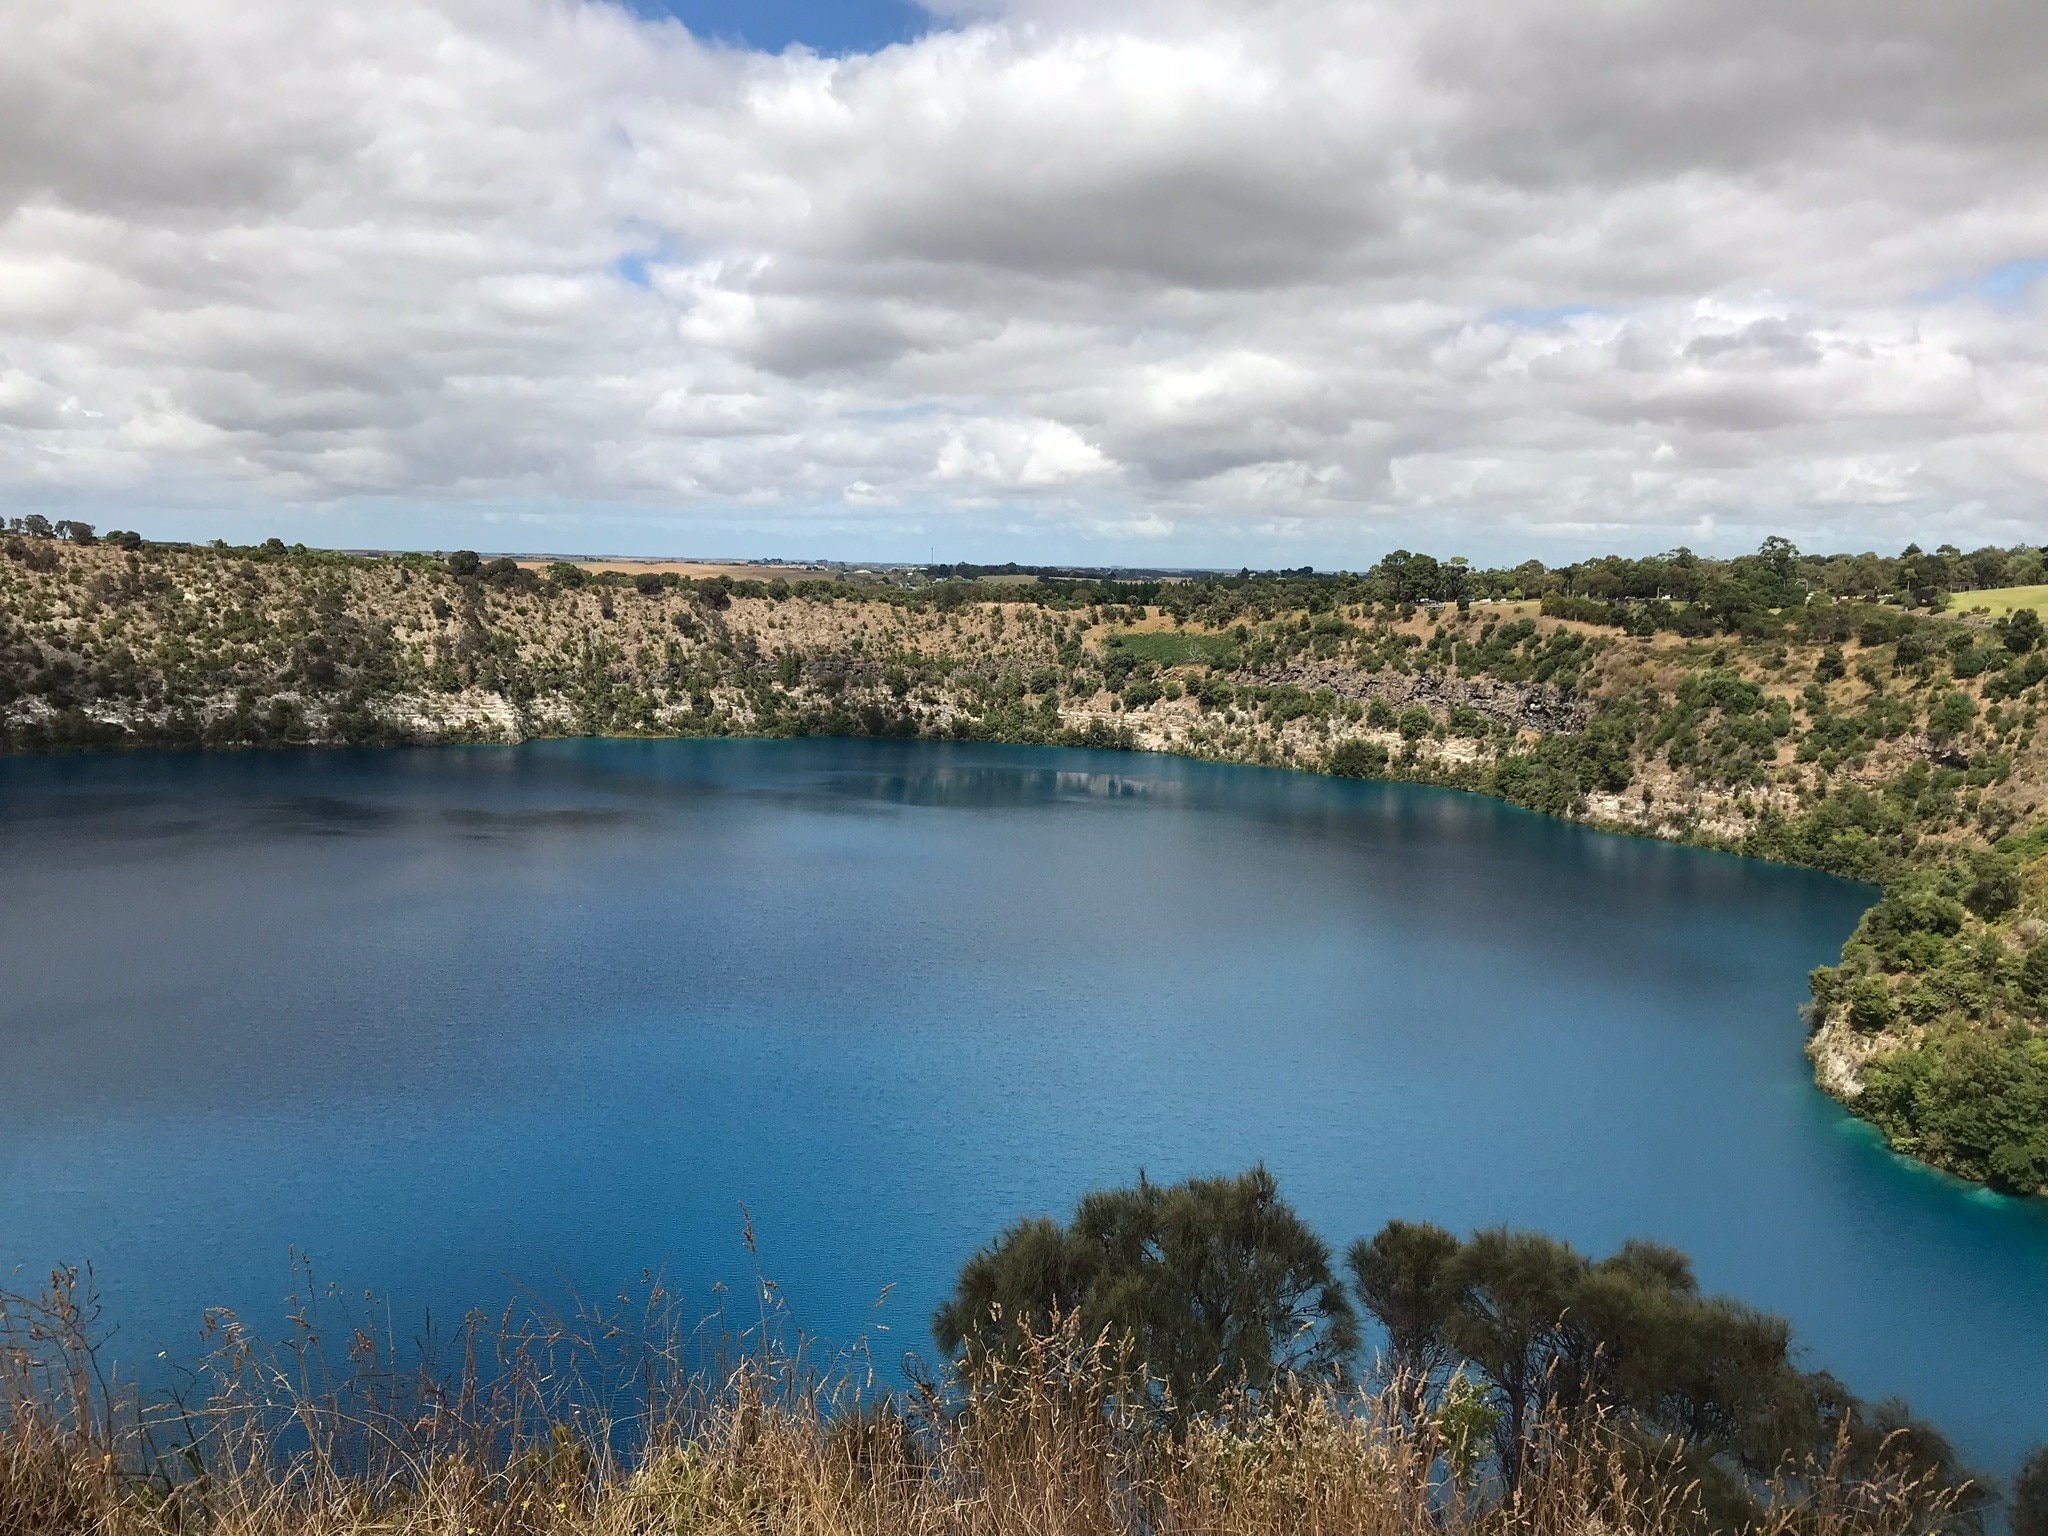 Mount Gambier is a great place for a pit stop when driving to Adelaide. The Blue Lake is a crater lake that is vibrant blue in color because of all the minerals in the limestone below. #SMDdoesOZ #Australia